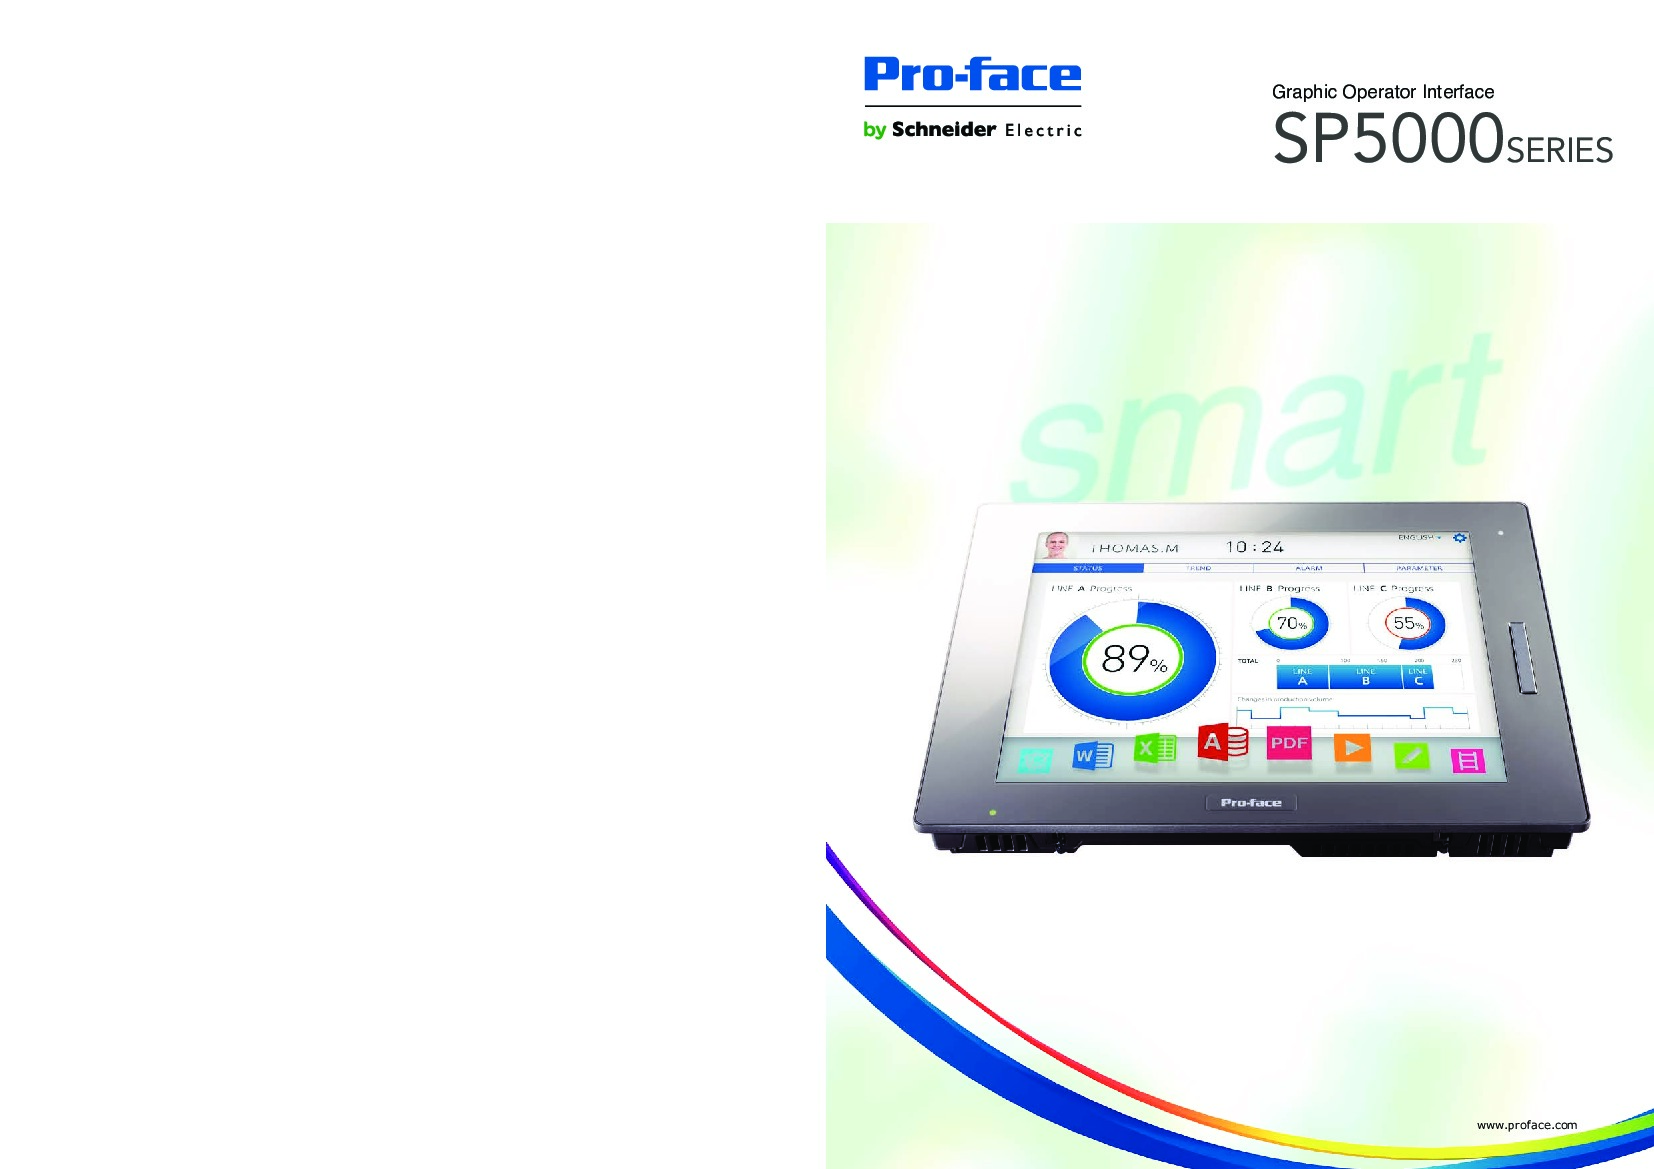 First Page Image of PFXSP5B41 Pro-face SP5000 Catalog.pdf